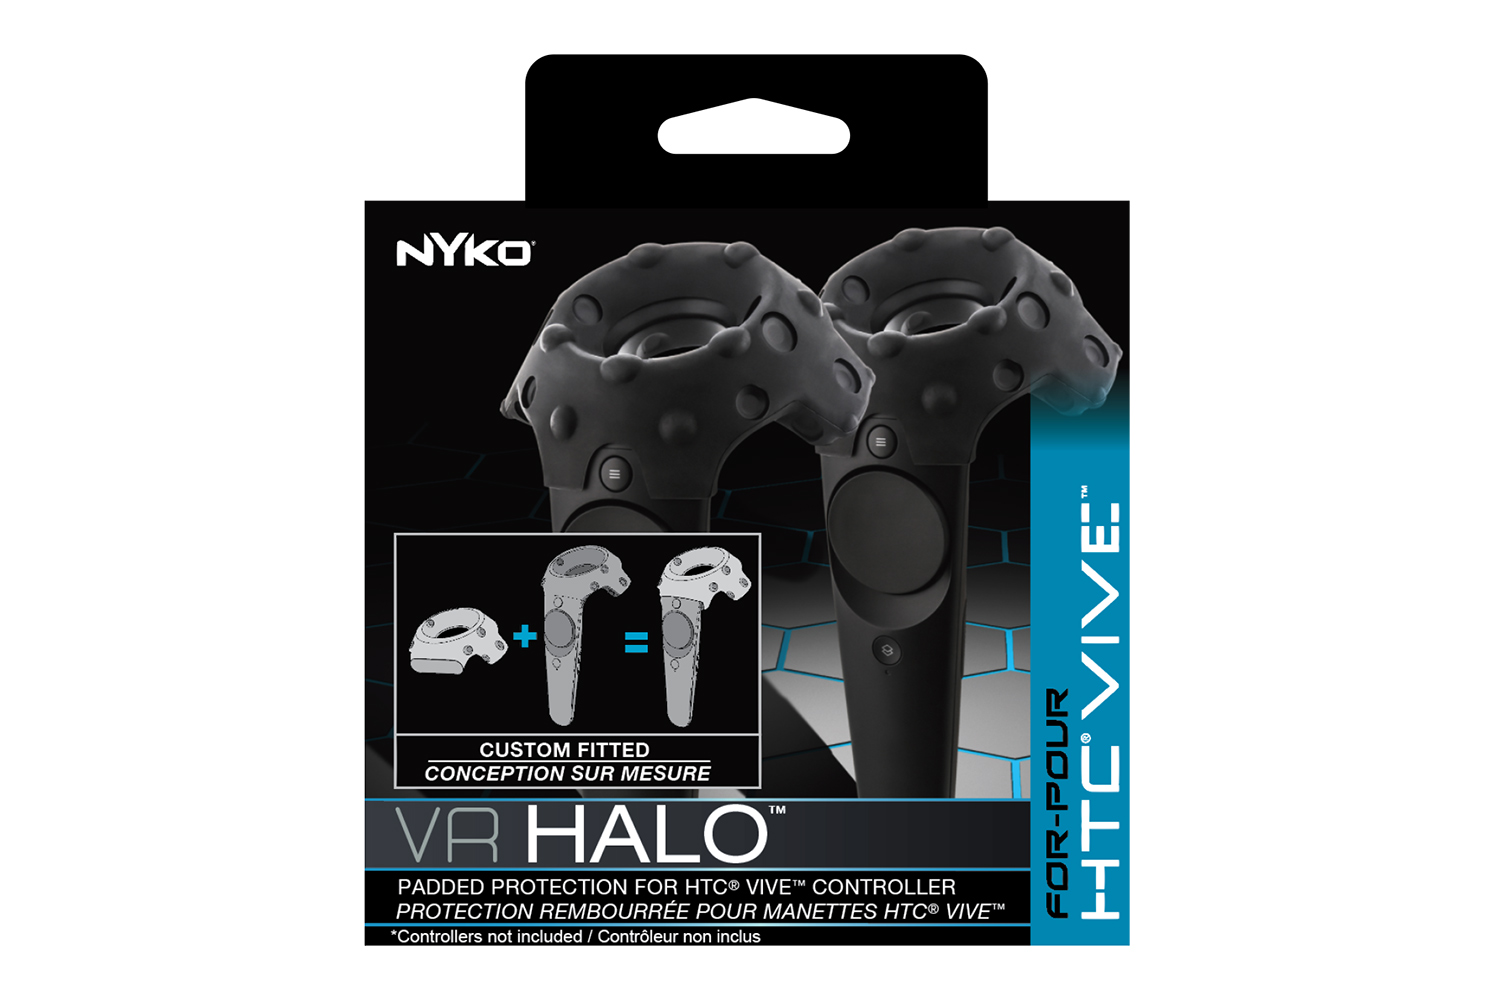 VR Halo for HTC Vive